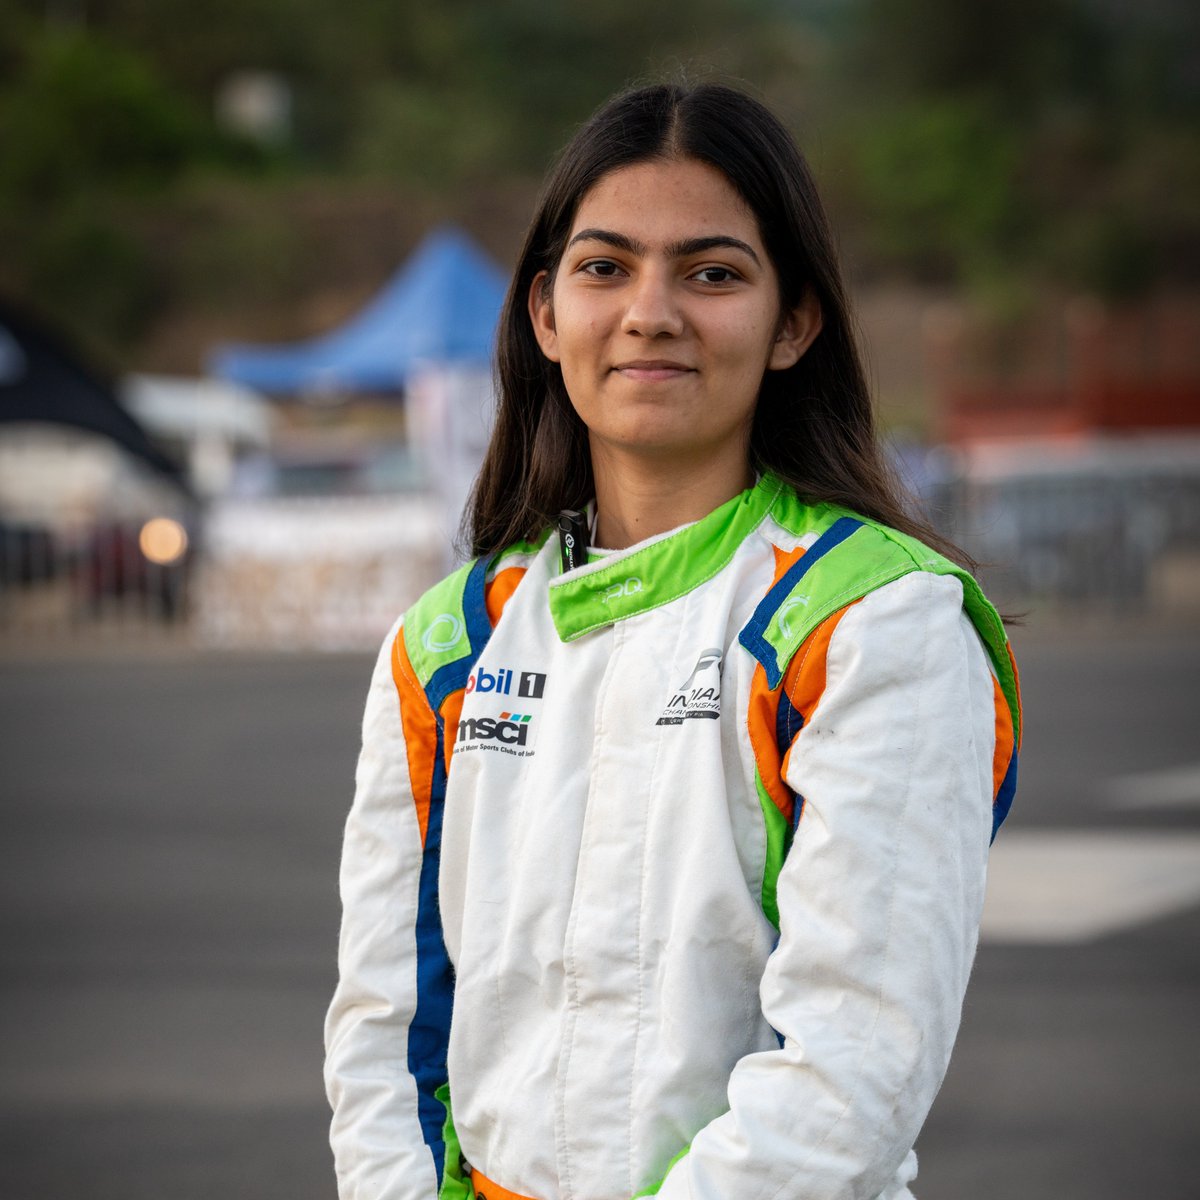 🚨We are now live with racing driver @ShriyaLohia on all being a 15-year-old racing driver, the impact of the Indian F4 championship, and why she doesn’t really miss not having a social life. Check out the link below to tune in 🔗 open.spotify.com/episode/5CbzK7… #WomenInMotorsport #F4